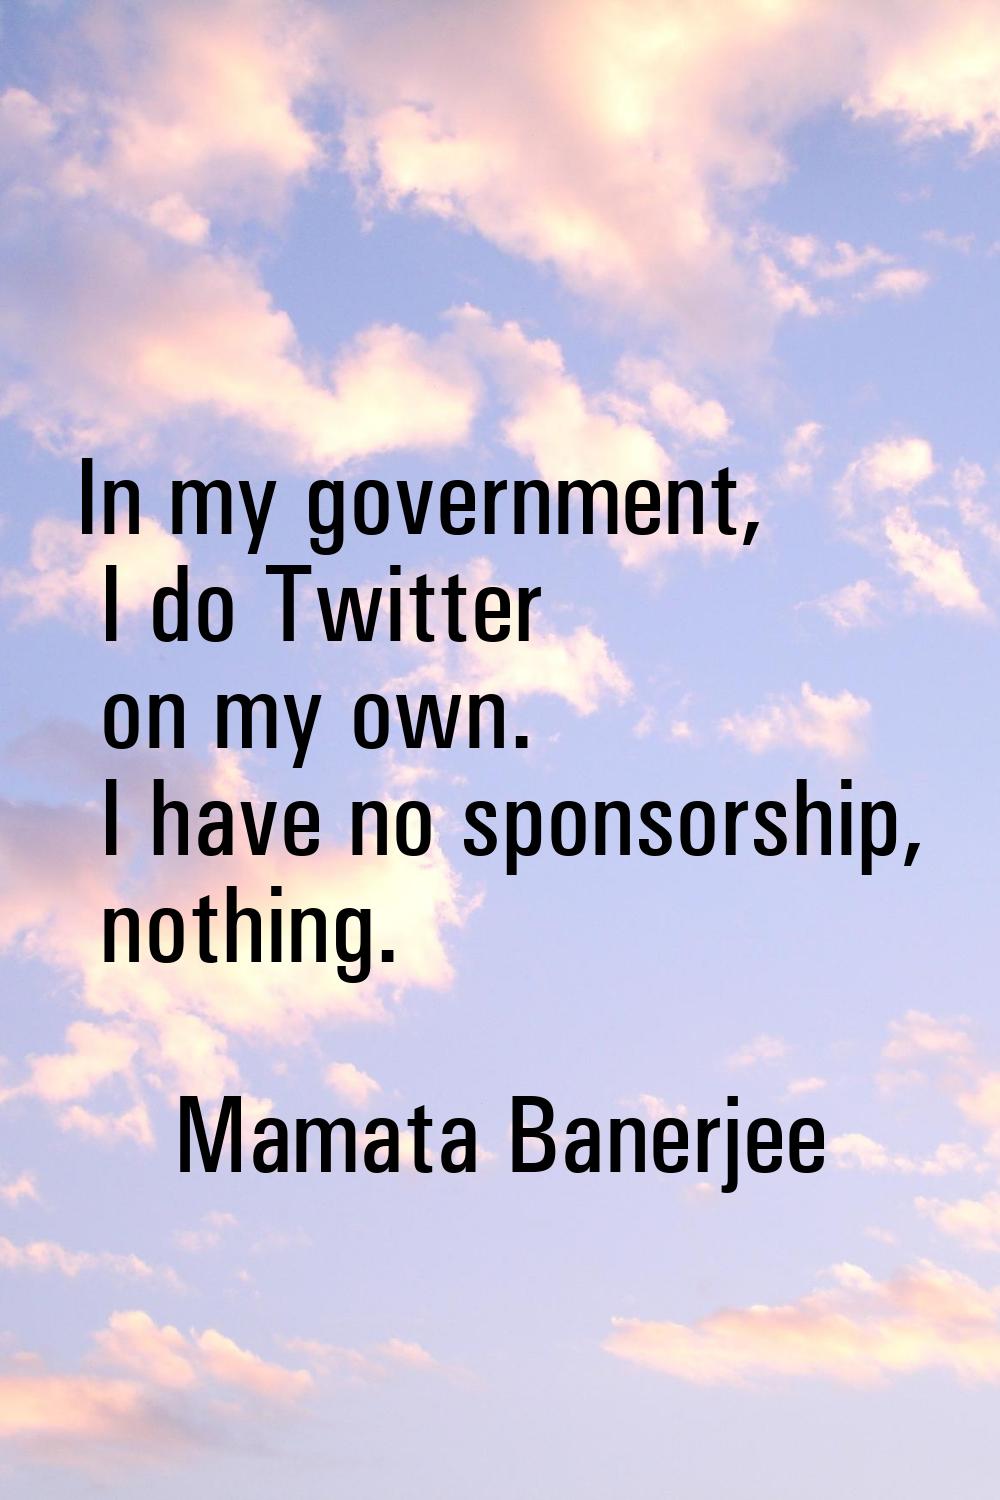 In my government, I do Twitter on my own. I have no sponsorship, nothing.